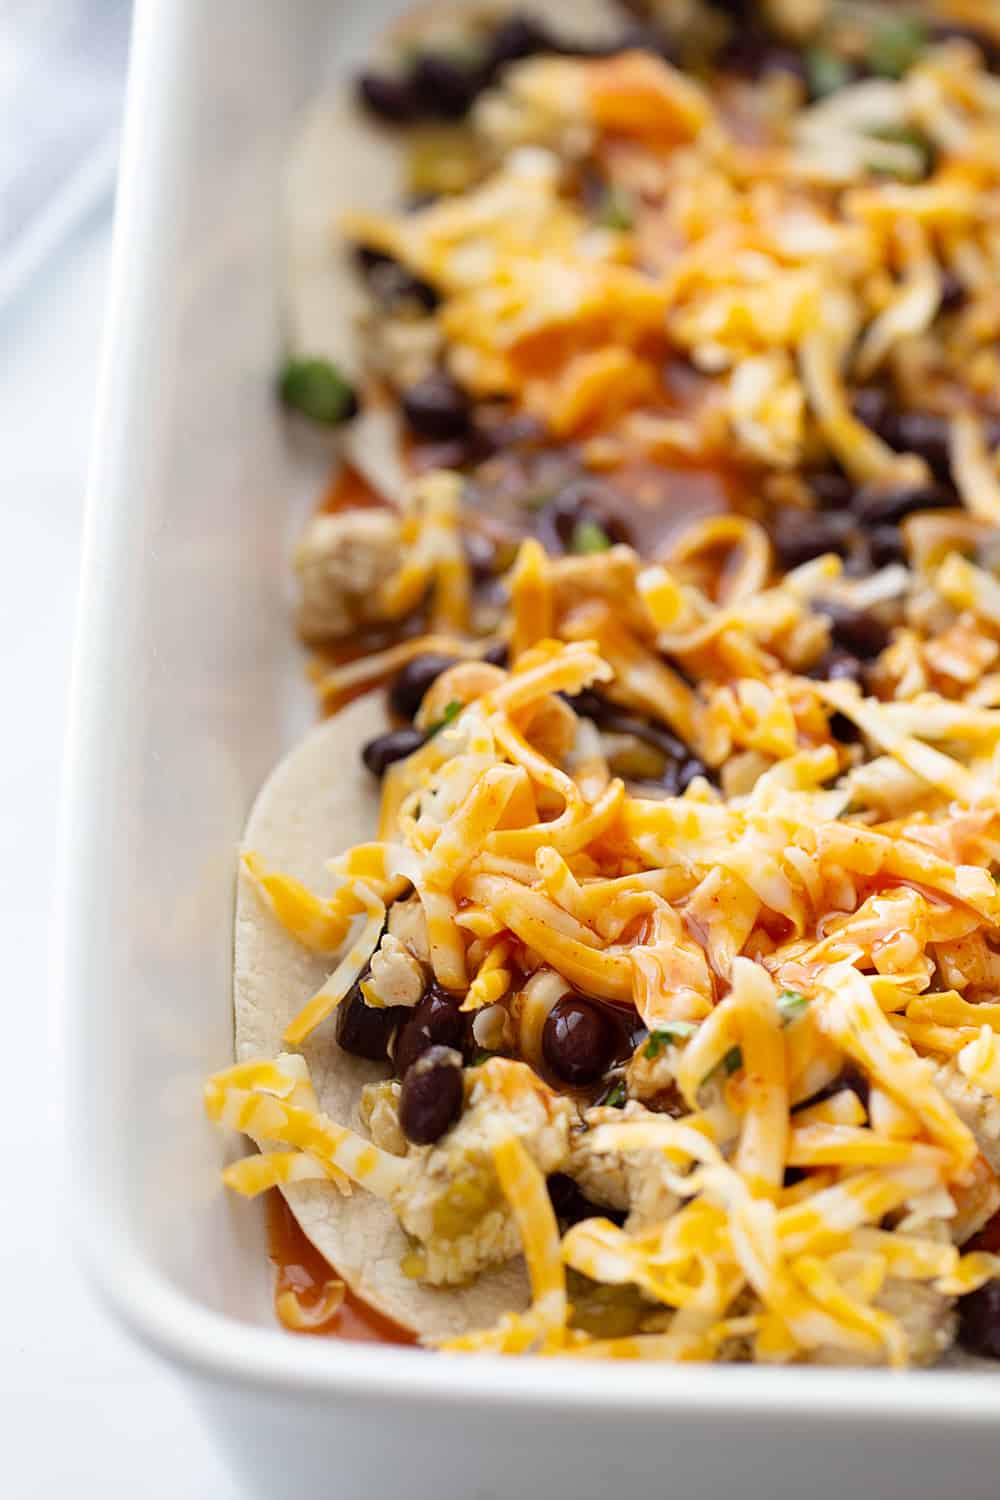 Layered Black Bean Enchiladas - When you don't have the time for classic chicken enchiladas, try these layered black bean enchilads. Quick, easy, and delicious! #enchiladas #mexicanrecipe #mexicanfood #blackbean #halfscratched #tacotuesday #easyrecipe #enchilada